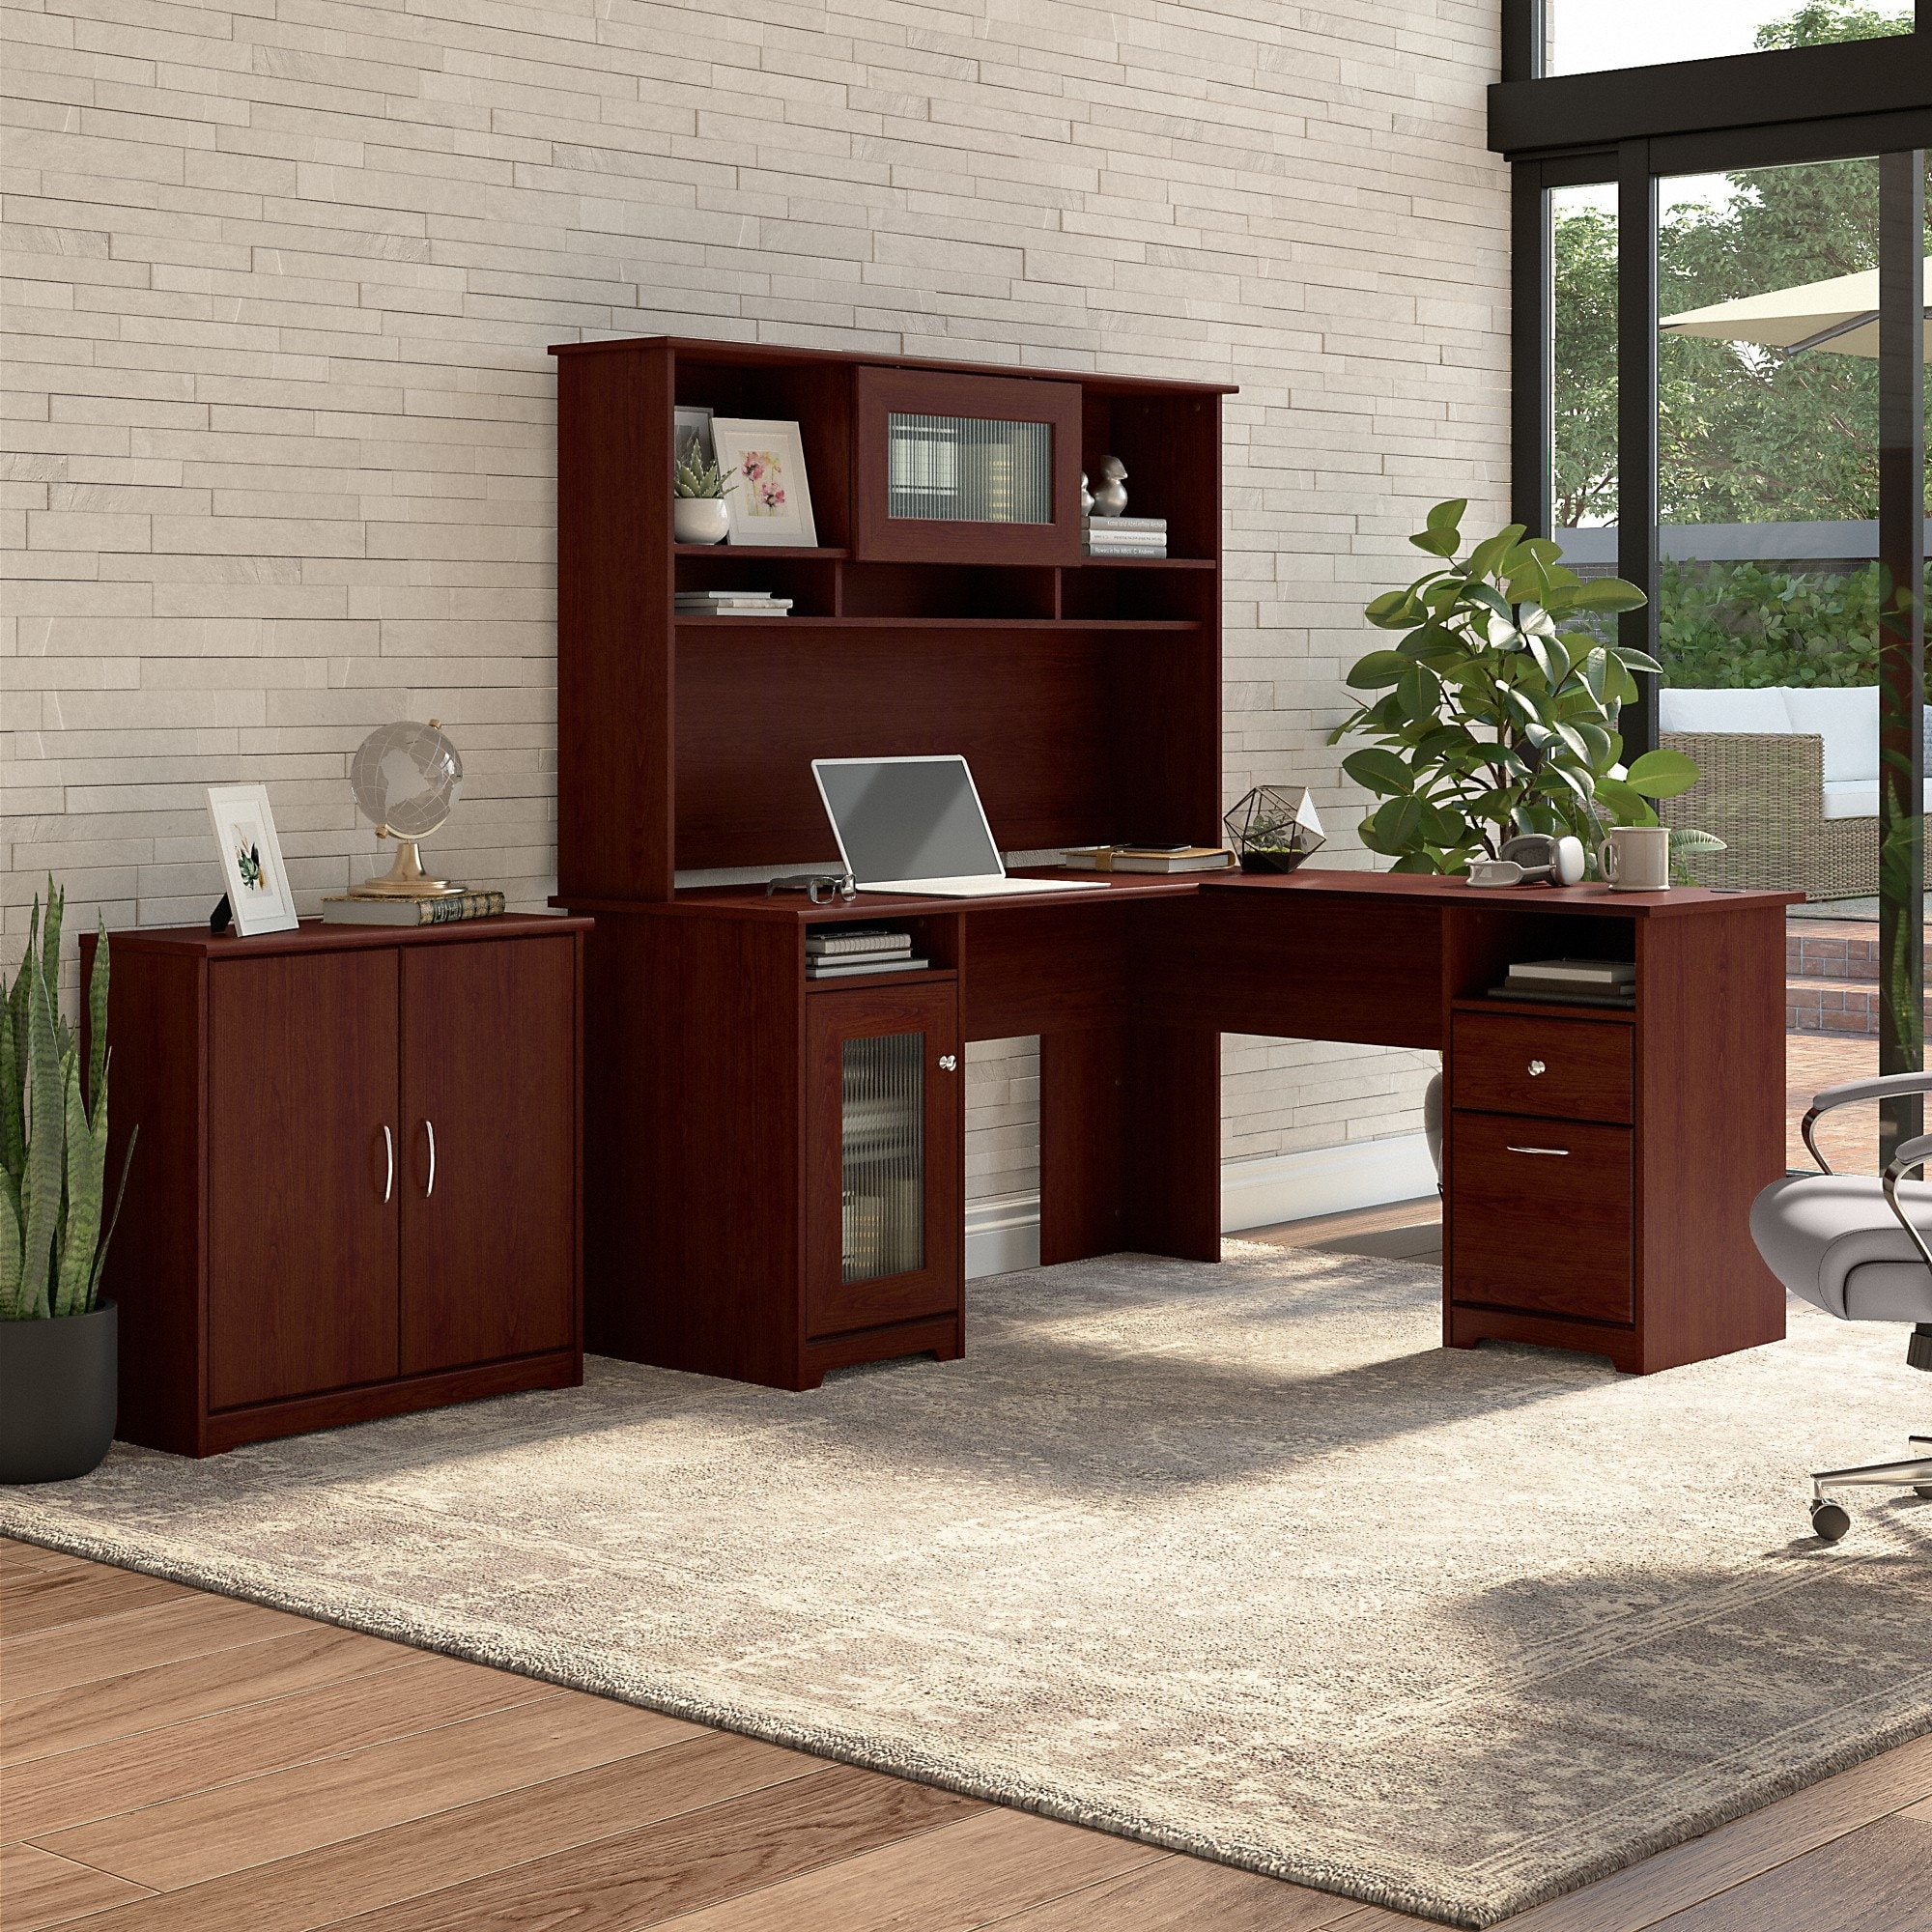 https://ak1.ostkcdn.com/images/products/is/images/direct/73604c099070067e213a4b3c8e4c525ec9eb081c/Cabot-60W-L-Desk-with-Hutch-and-Storage-Cabinet-by-Bush-Furniture.jpg